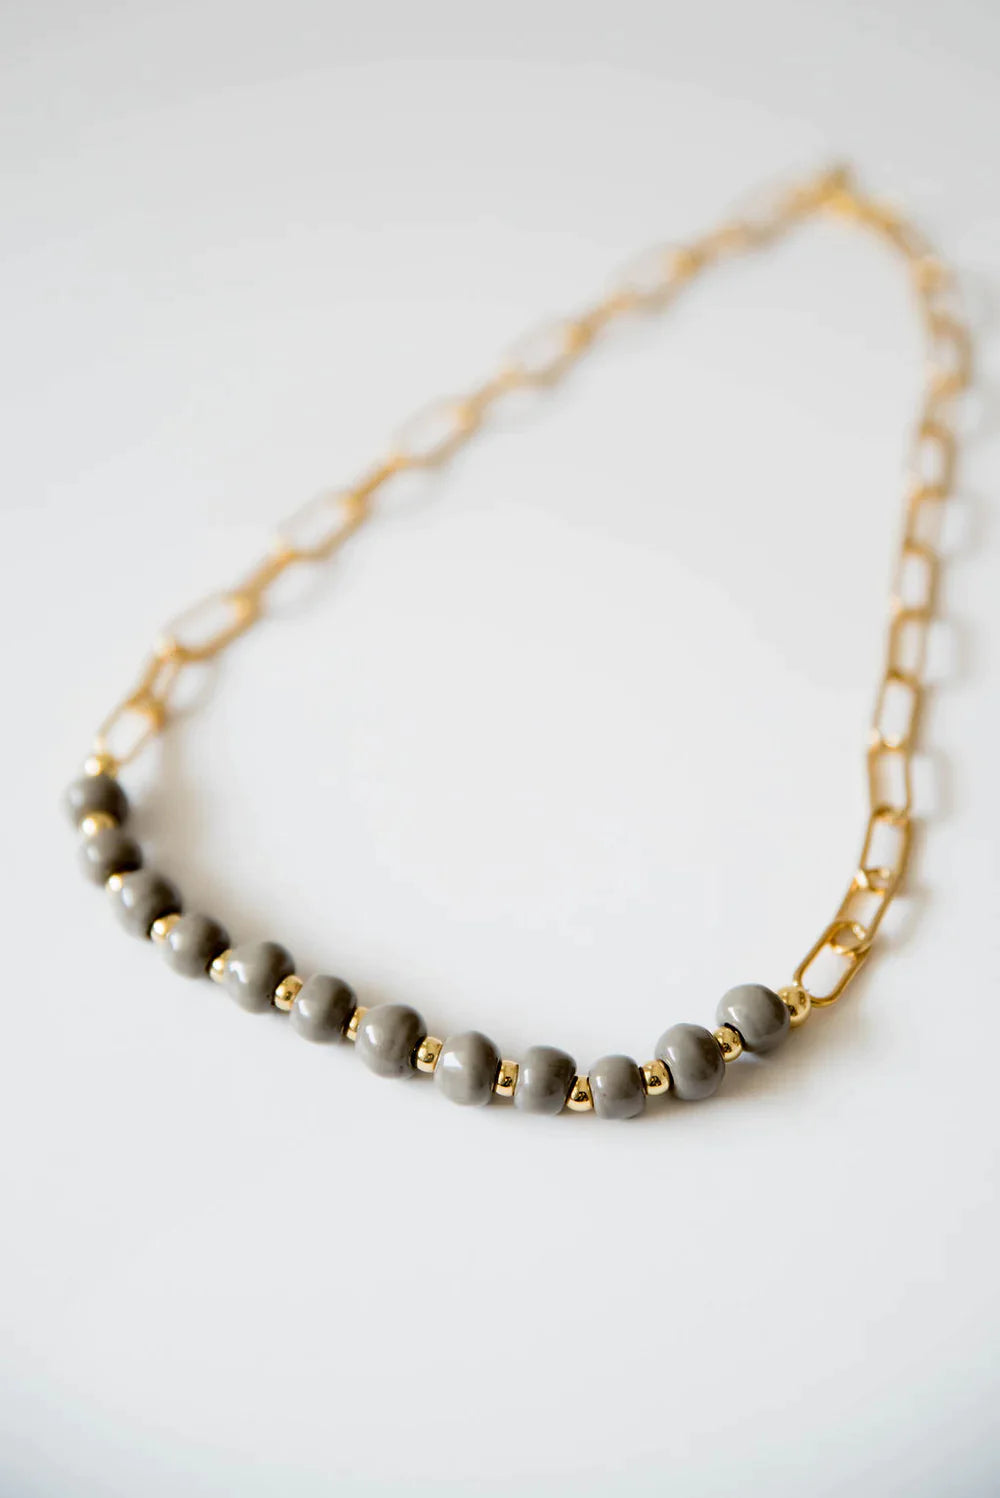 Bel Koz Gold Single Strand Clay Necklace - STORM - Link in description to purchase at Betsey's